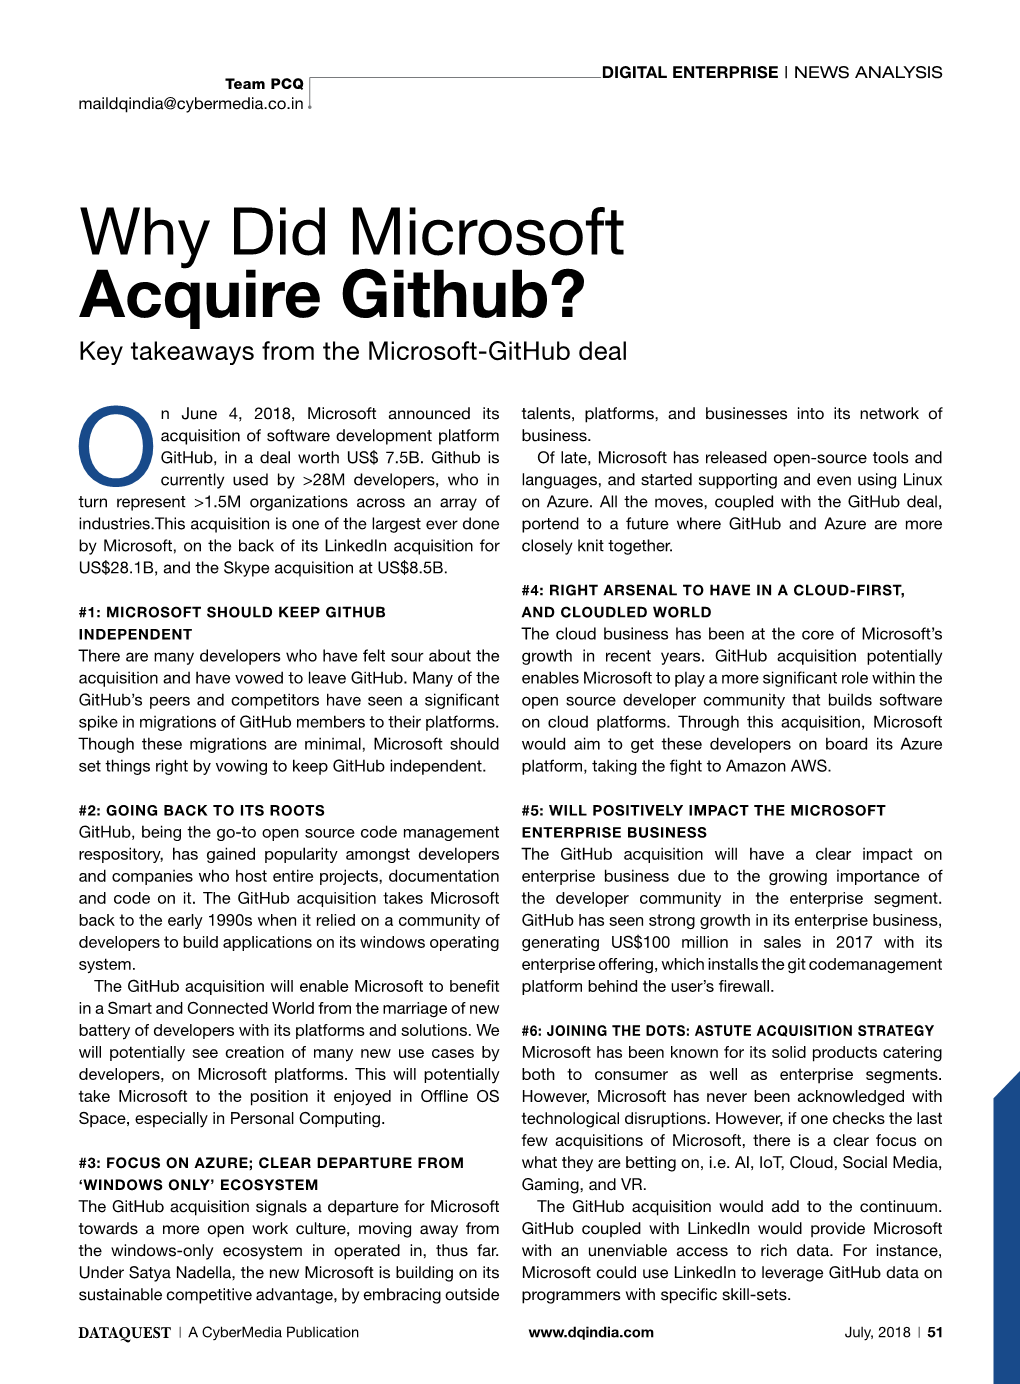 Why Did Microsoft Acquire Github? Key Takeaways from the Microsoft-Github Deal